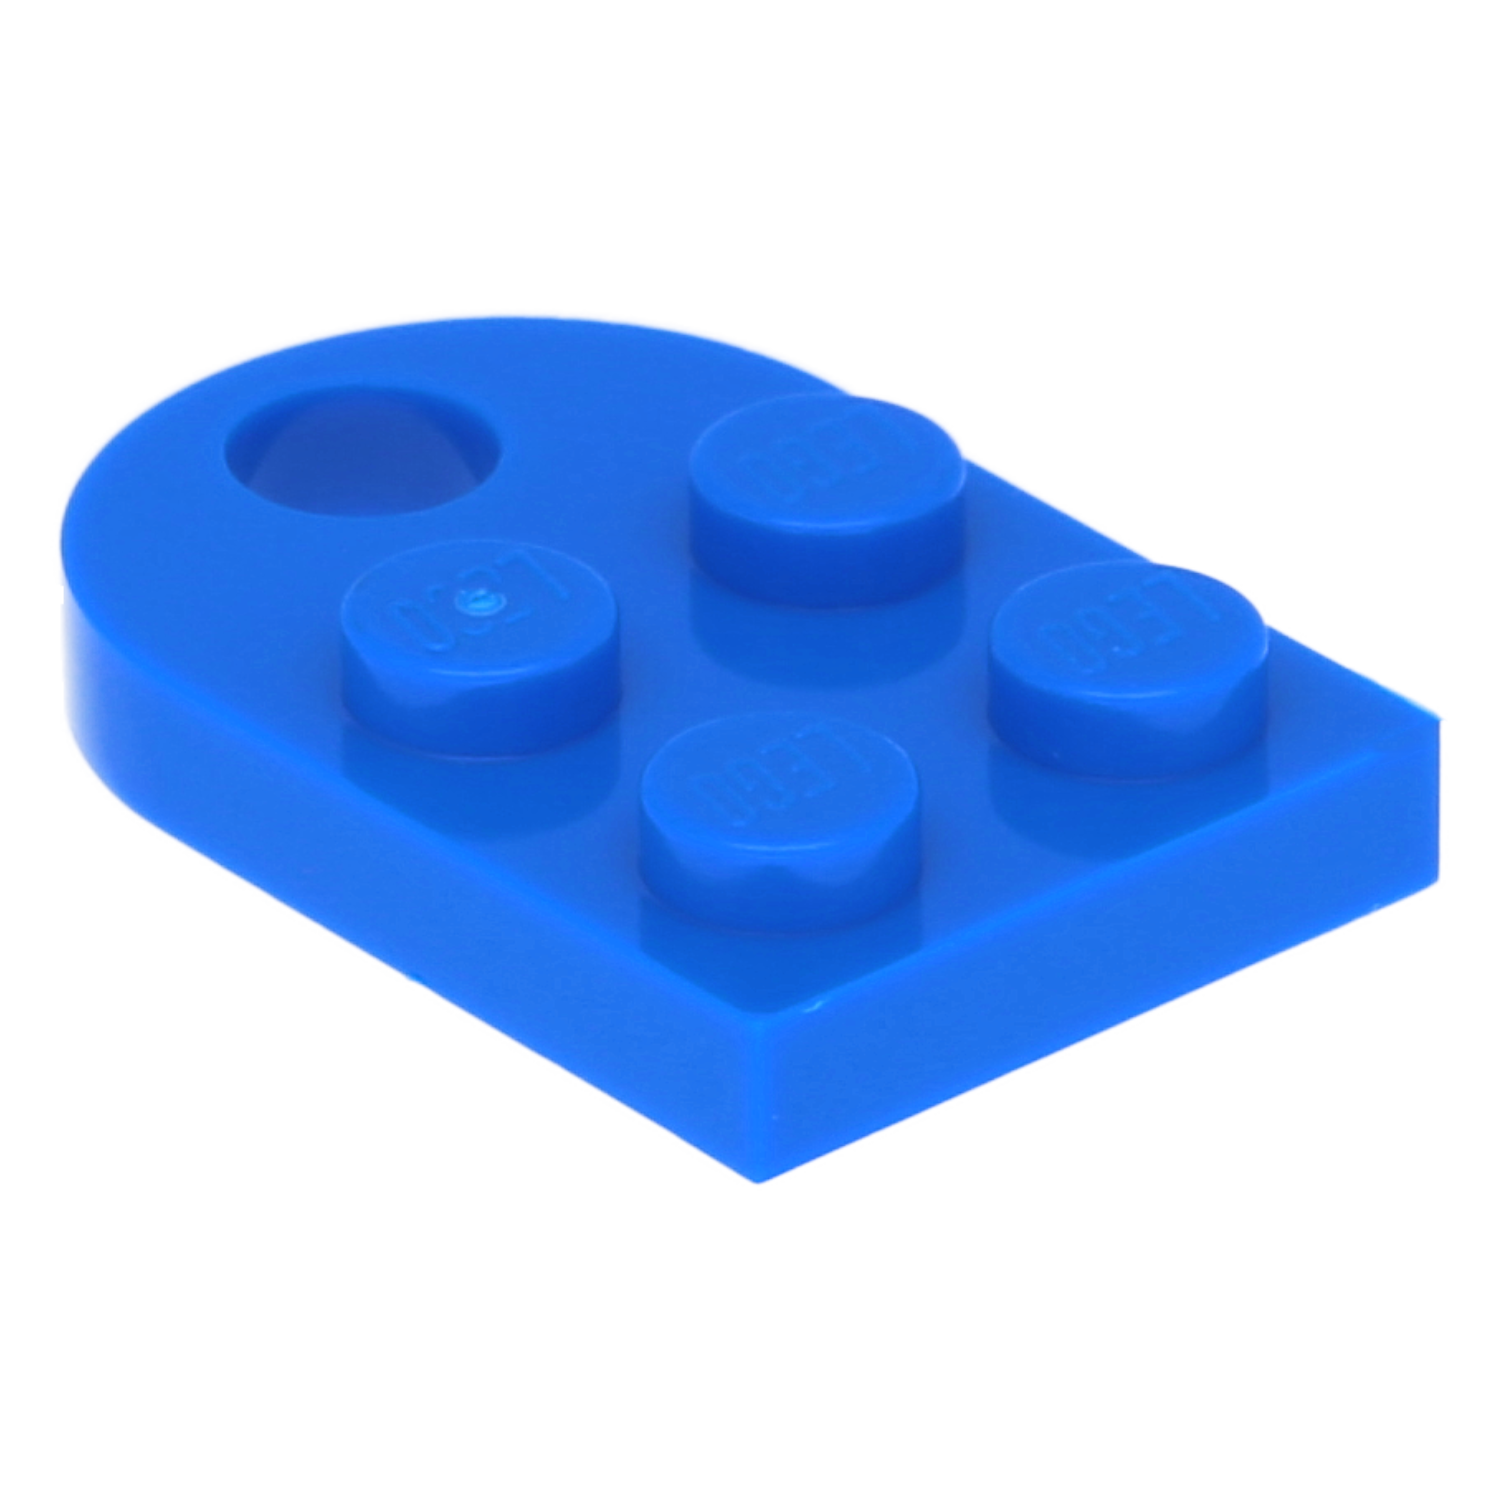 Lego plates (modified) - 2 x 3 rounded and a hole